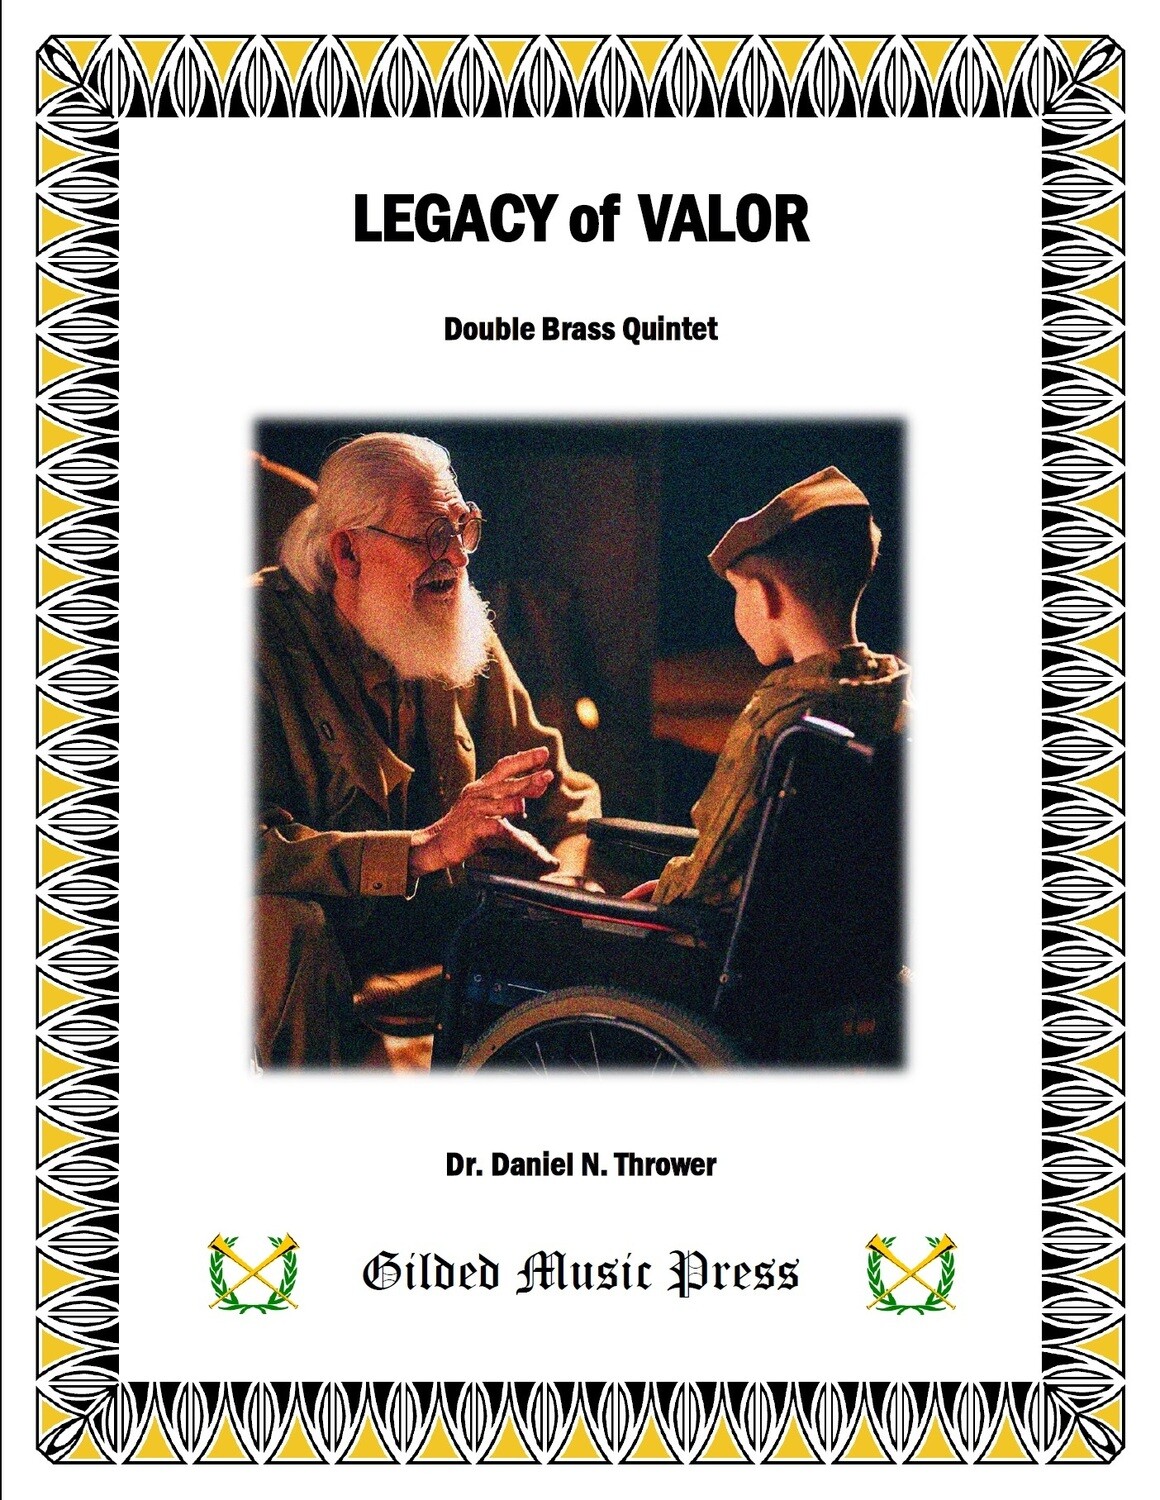 GMP 3902: Legacy of Valor (Double Brass Quintet), Dr. Daniel Thrower